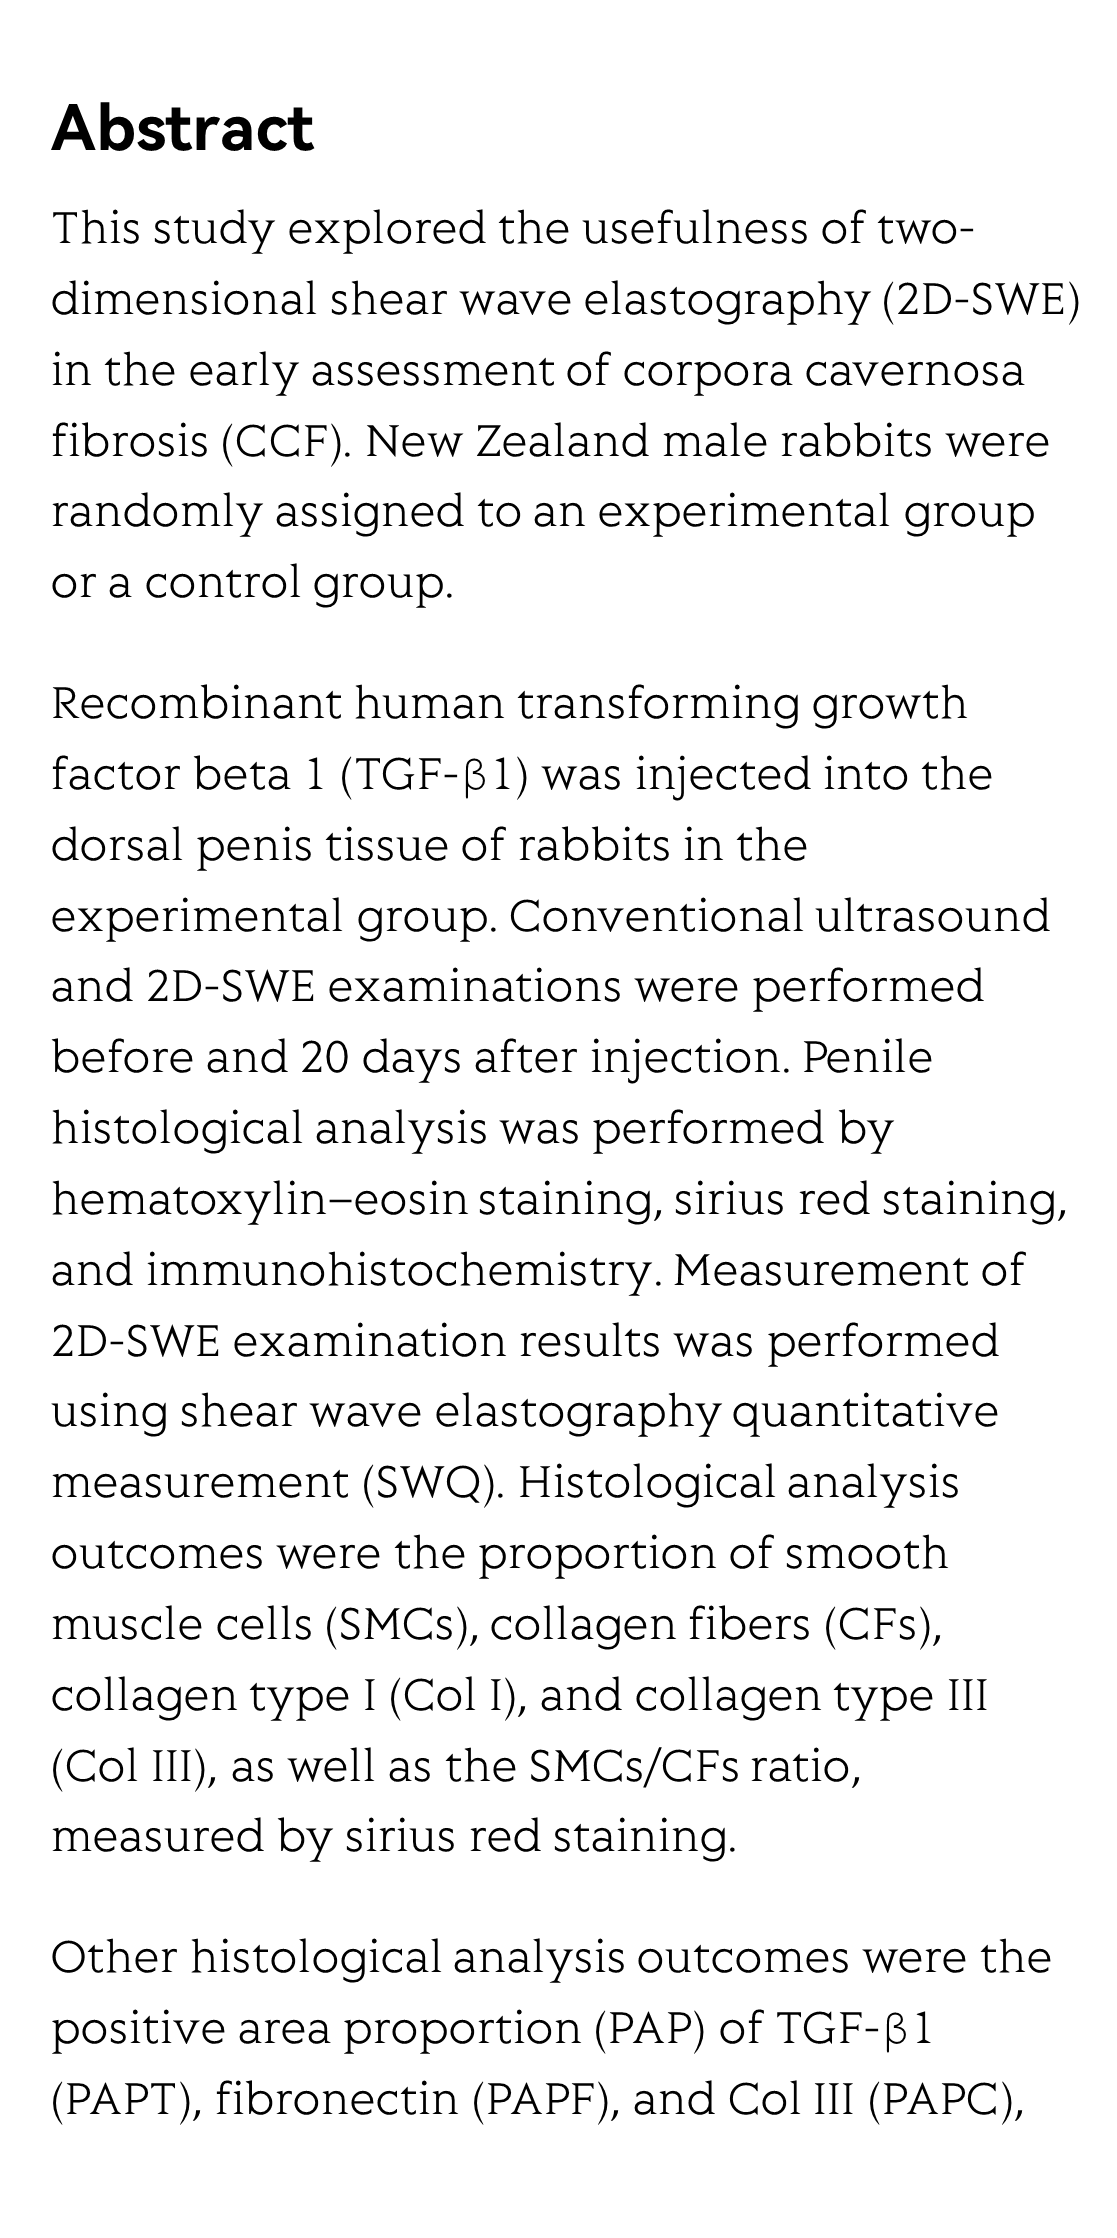 Experimental investigation of early assessment of corpora cavernosa fibrosis with two-dimensional shear wave elastography_2